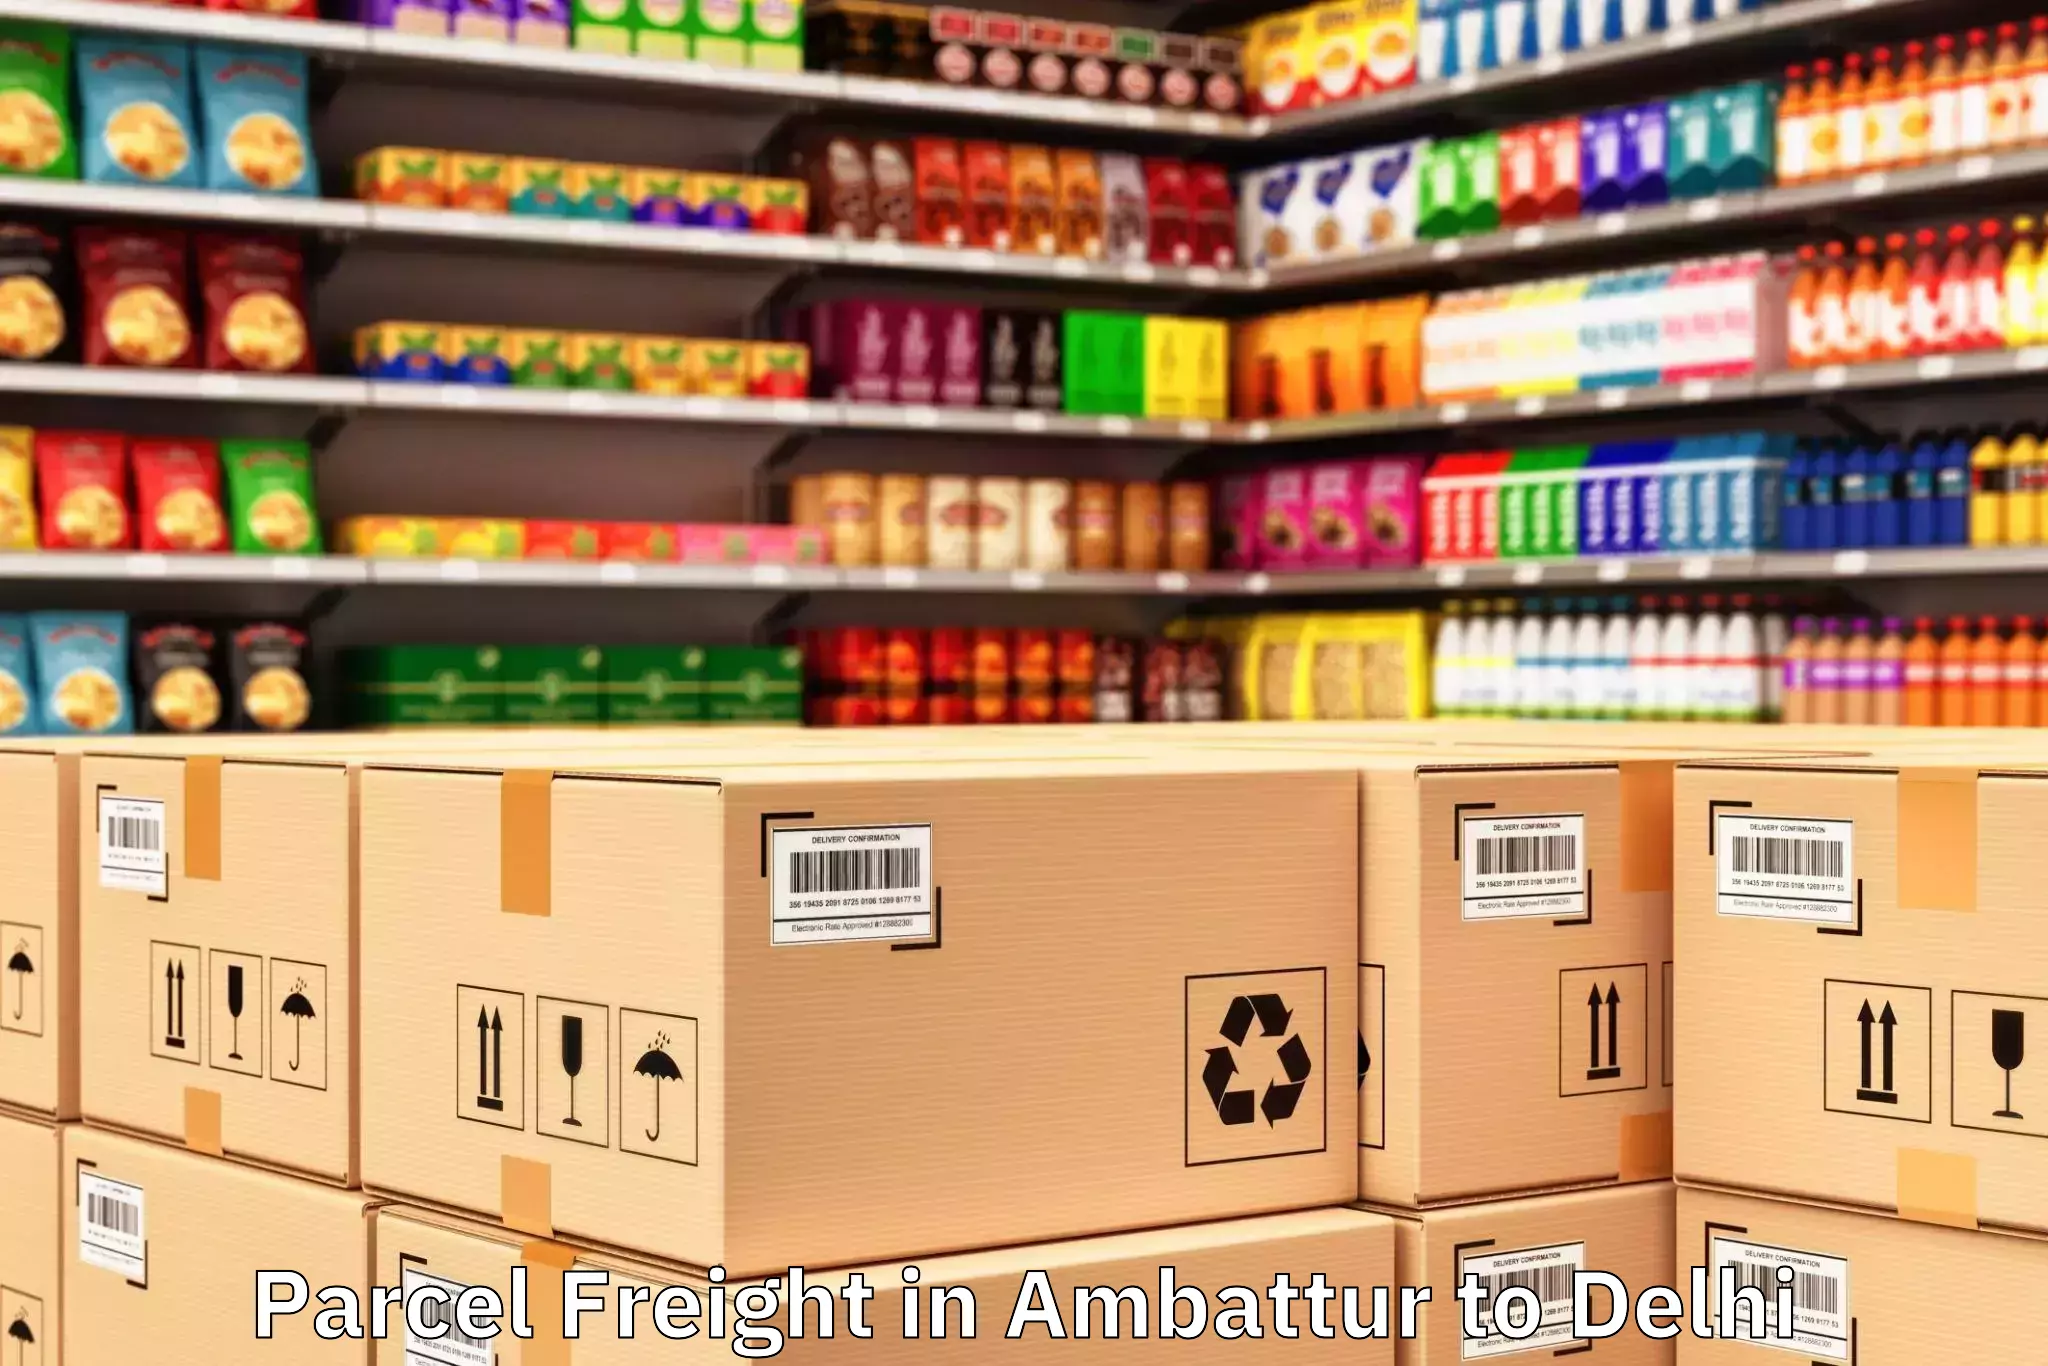 Ambattur to Functional Industrial Estate For Electronics Parcel Freight